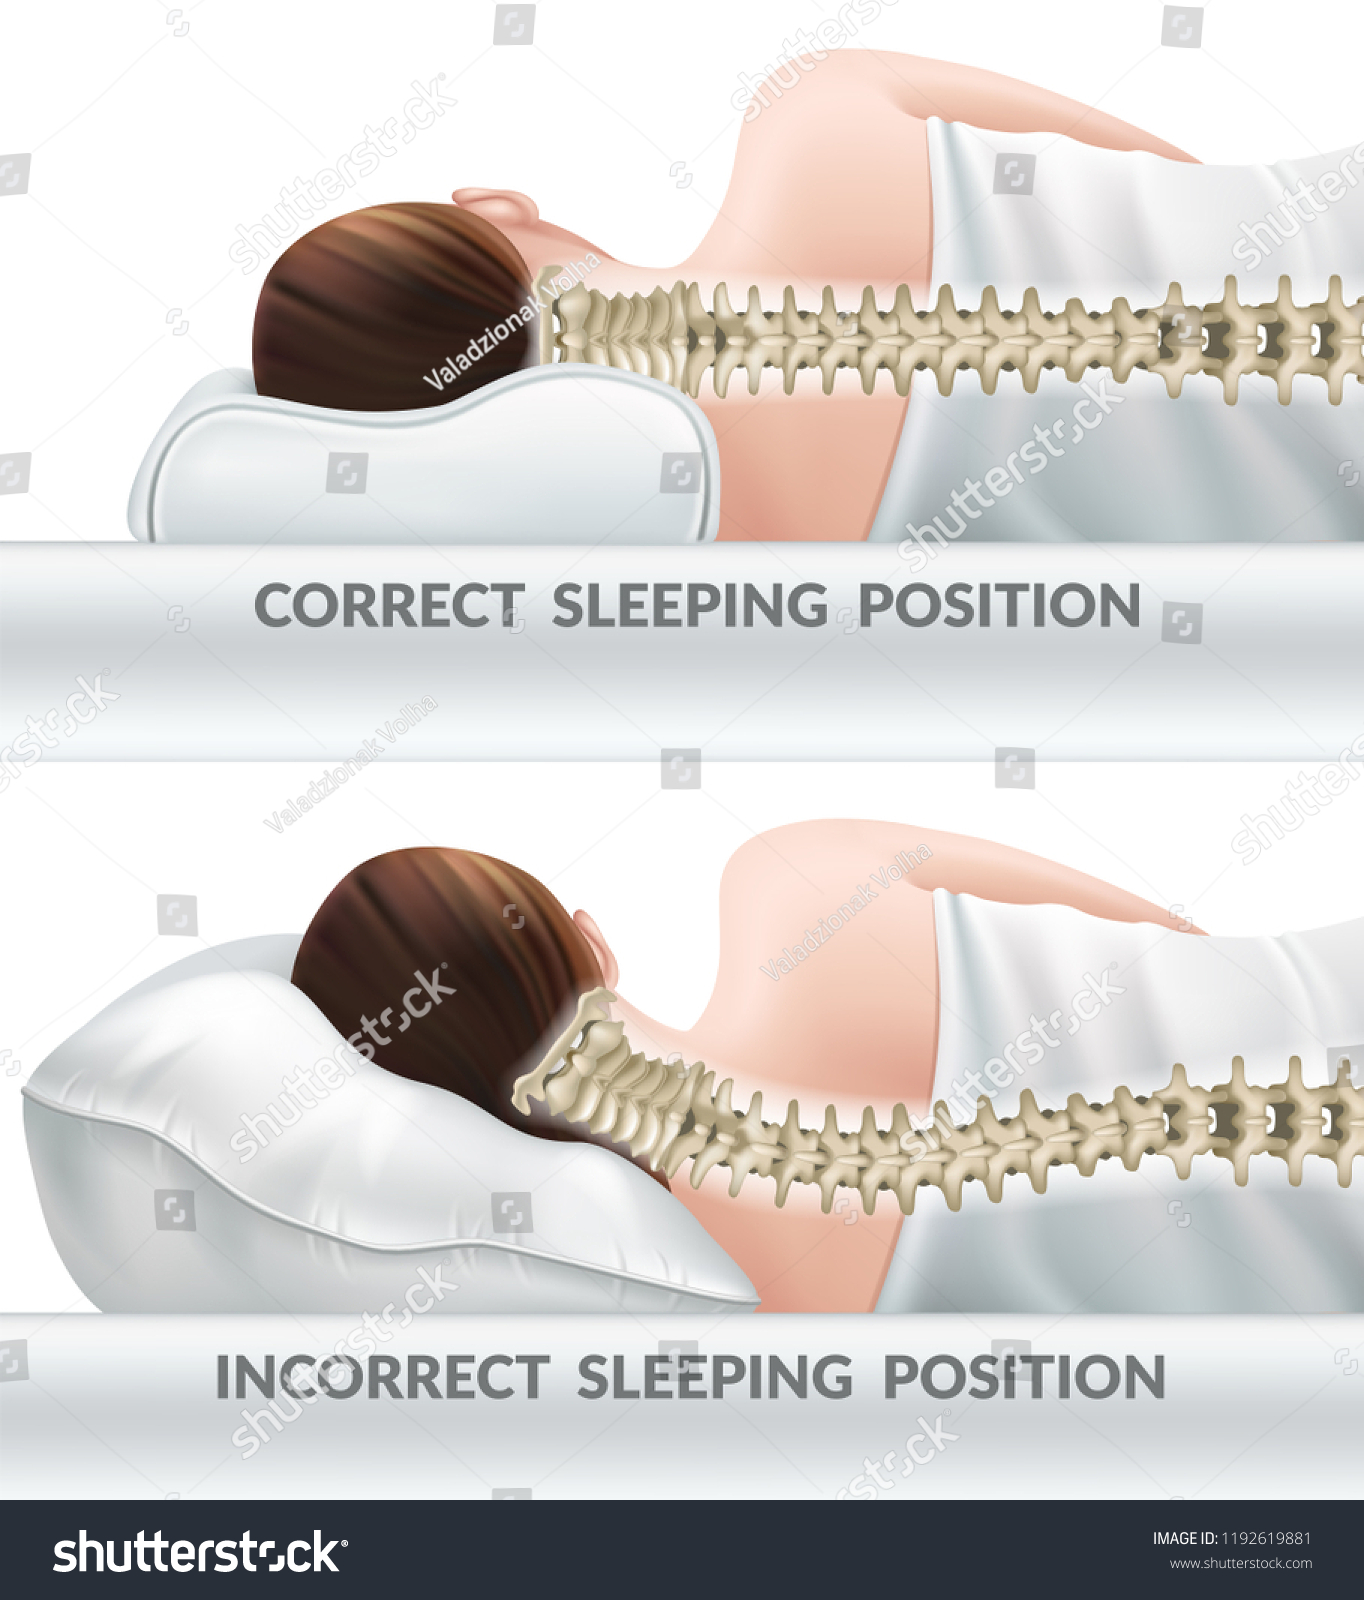 Correct Incorrect Sleeping Poses Right Wrong Stock Vector Royalty Free 1192619881 Shutterstock